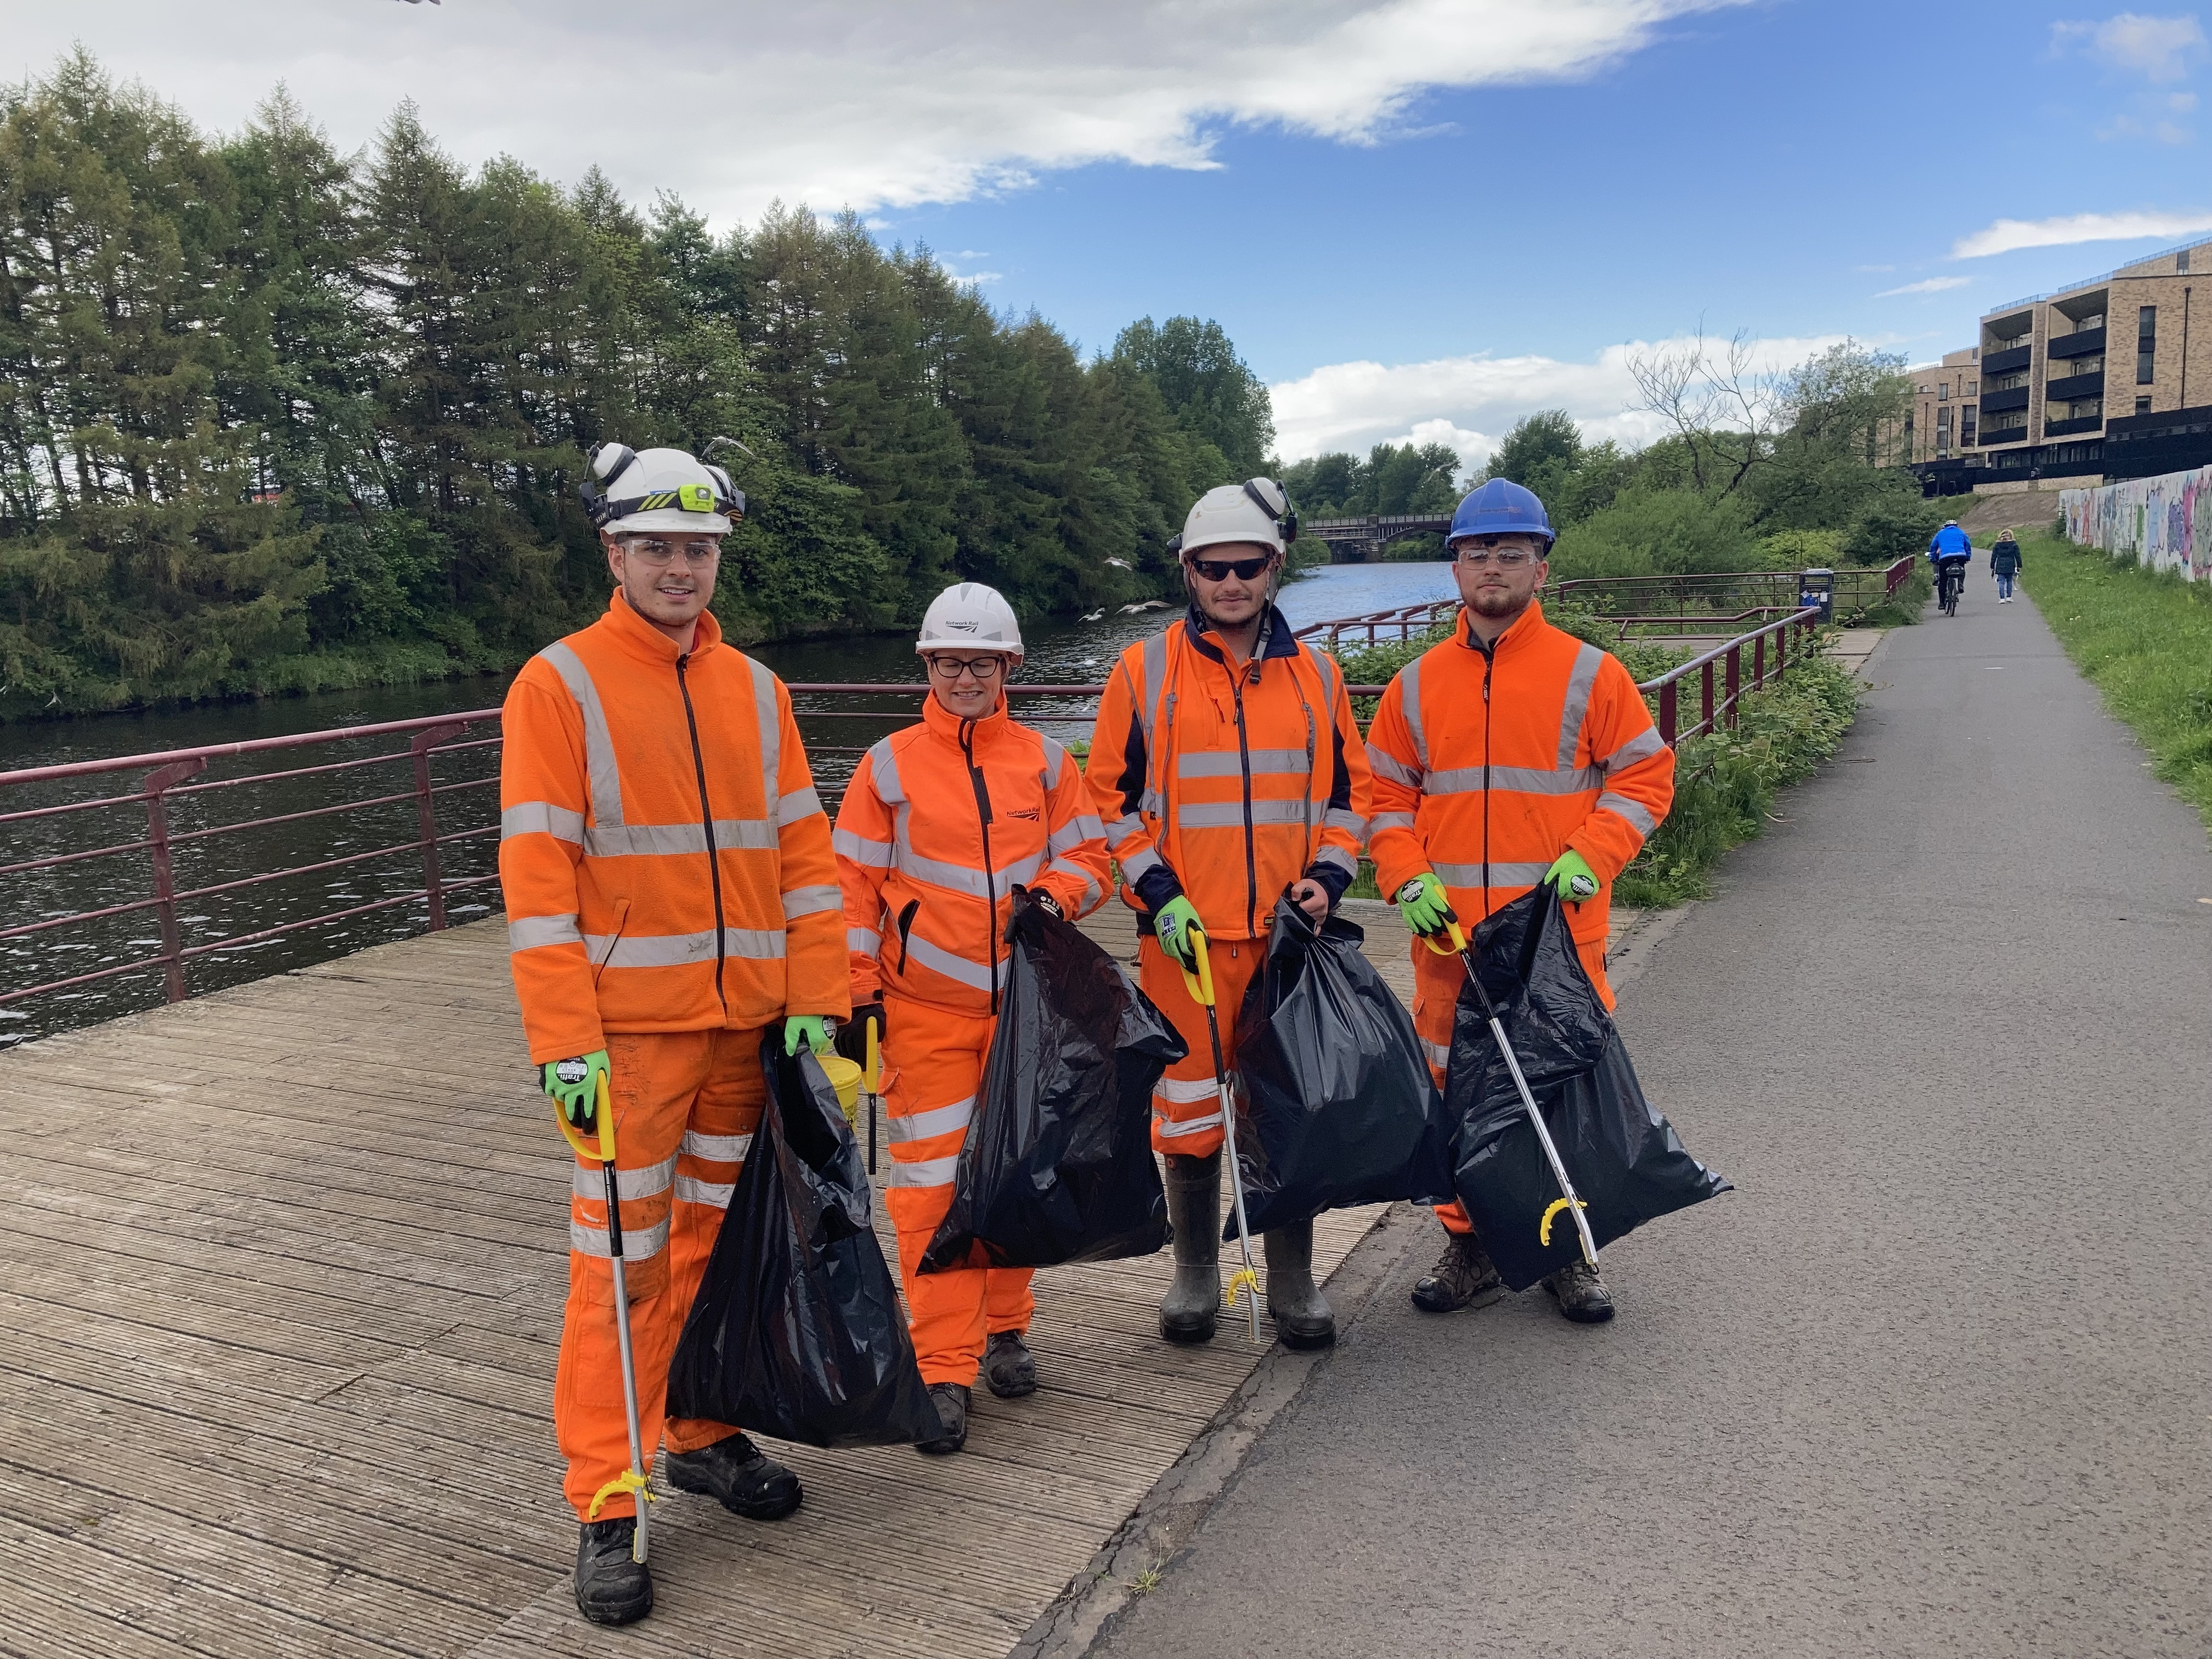 Litter picking near the Clyde Viaduct back in May 2022